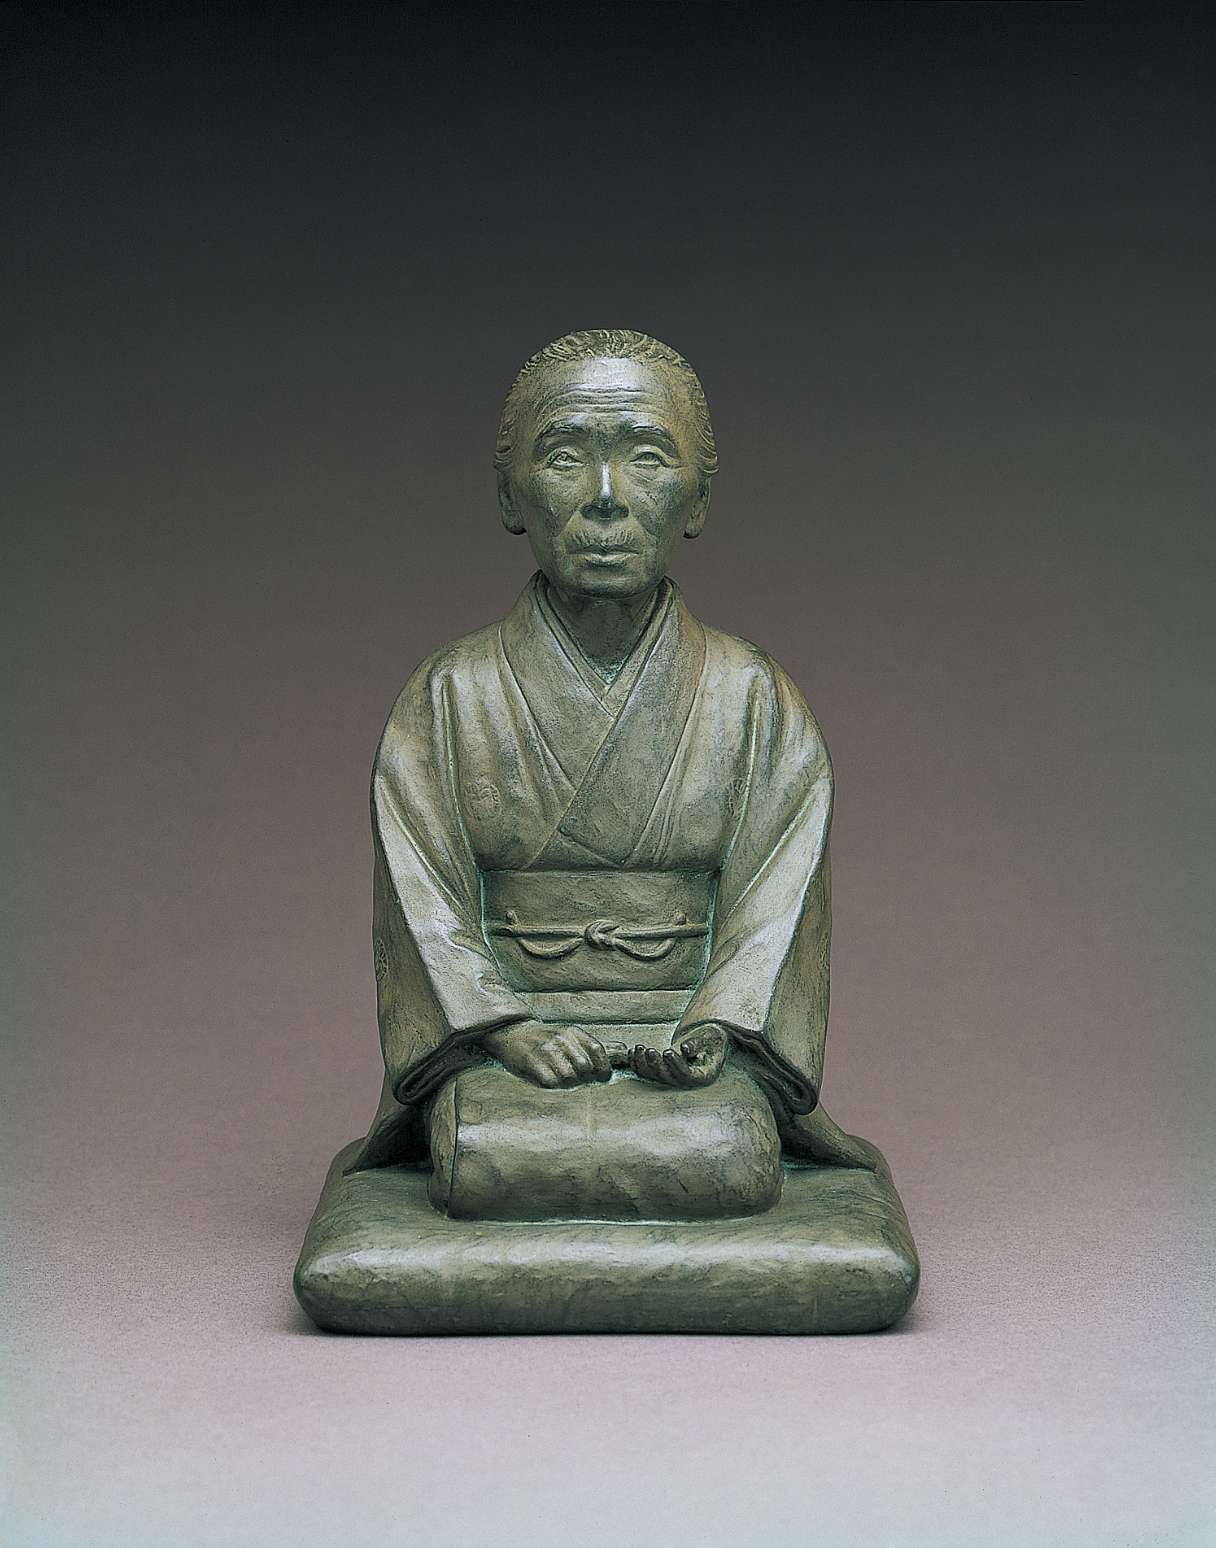 A gray, metallic statue of an elderly Japanese woman, hair pulled back, wearing traditional kimono and kneeling on a cushion. Her hands rest in her lap and her attentive face seems as if listening.